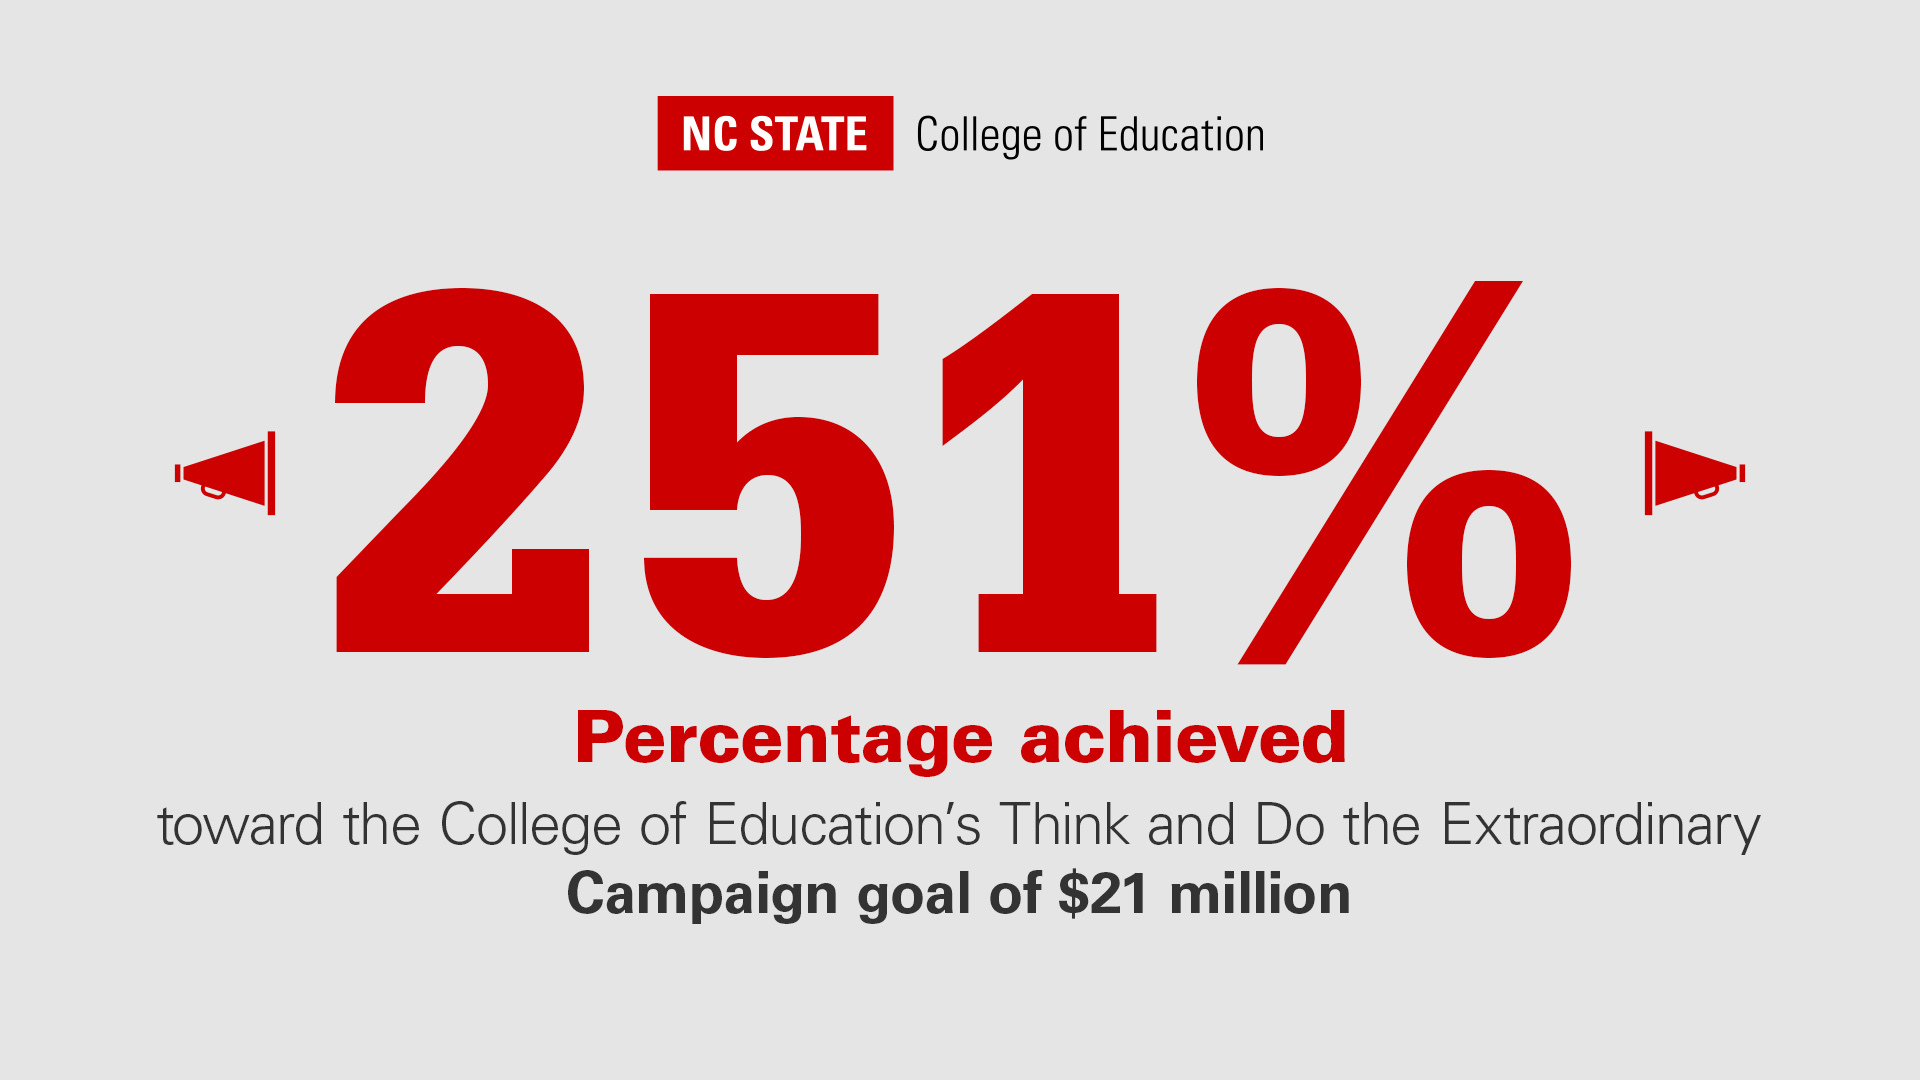 College of Education met 251% of its Think and Do the Extraordinary Campaign goal